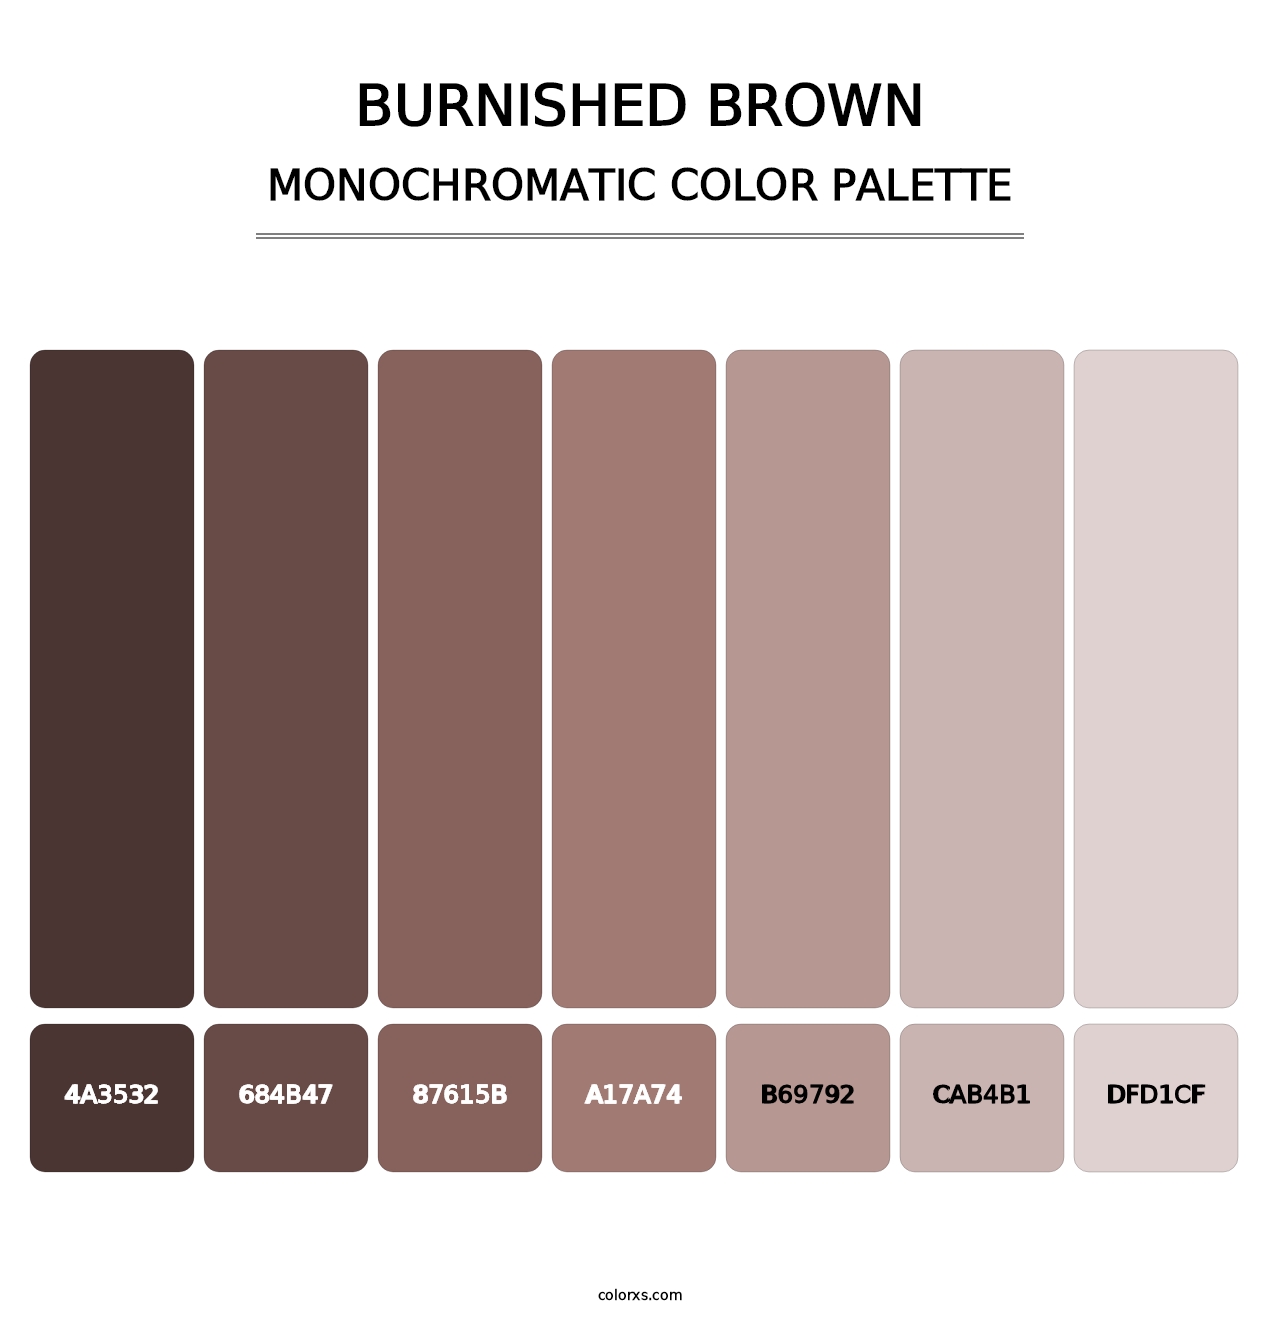 Burnished Brown - Monochromatic Color Palette